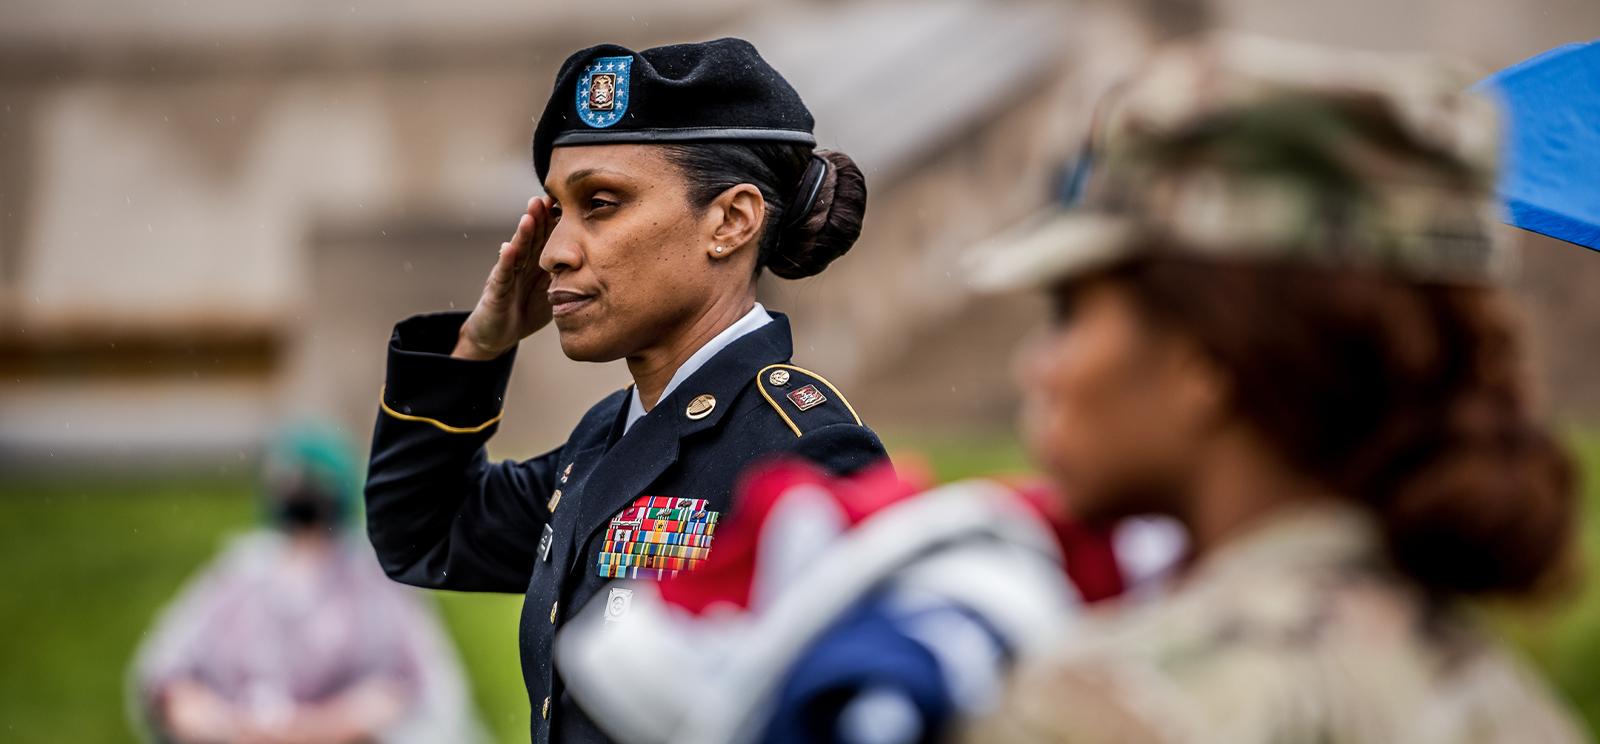 Modern photograph of a Black woman wearing military dress uniform saluting something out of frame. Another Black woman in camouflage uniform stands in the foreground out of focus.